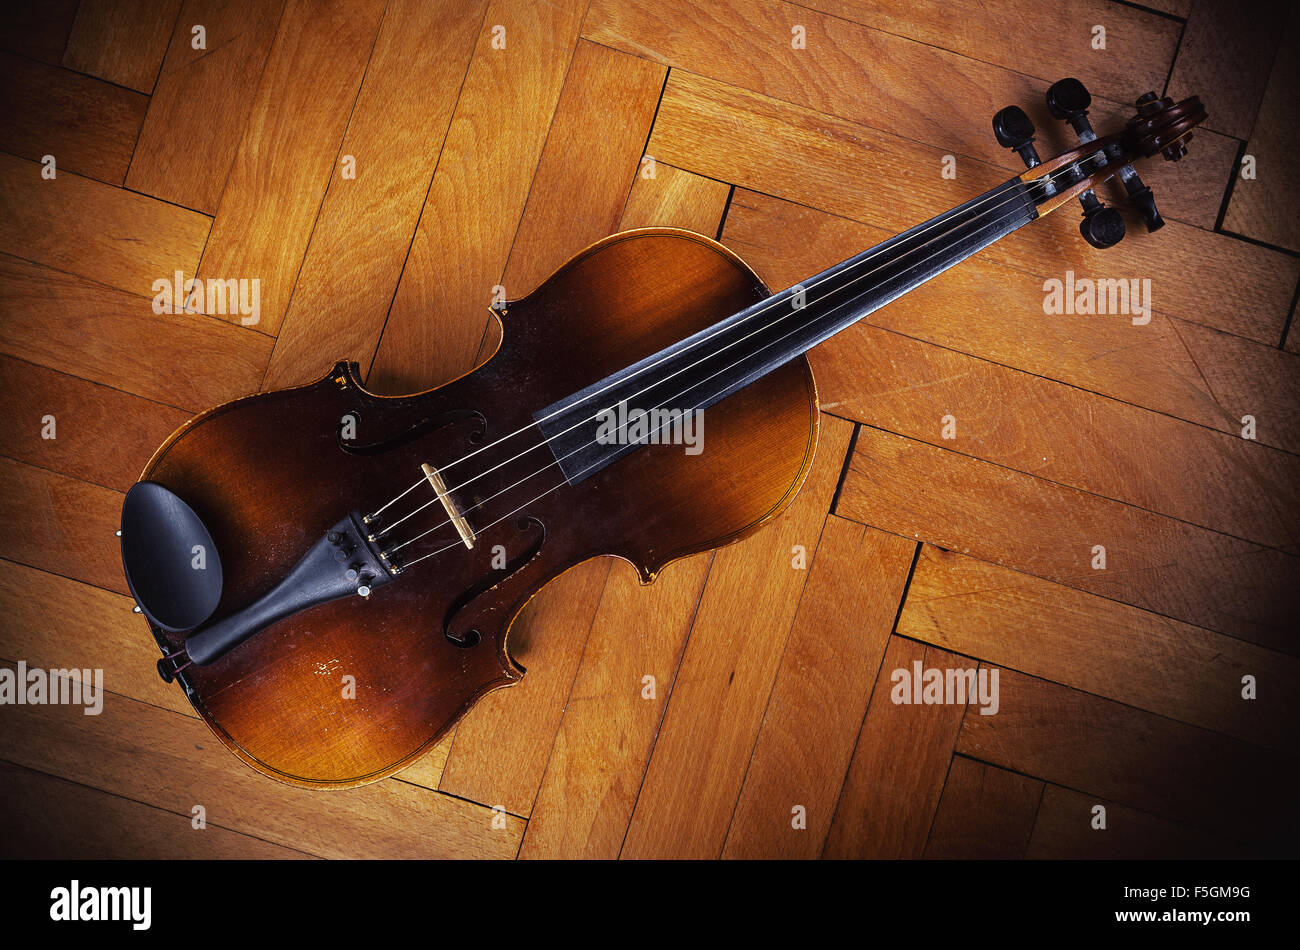 Old violin details, body part and neck. Stock Photo